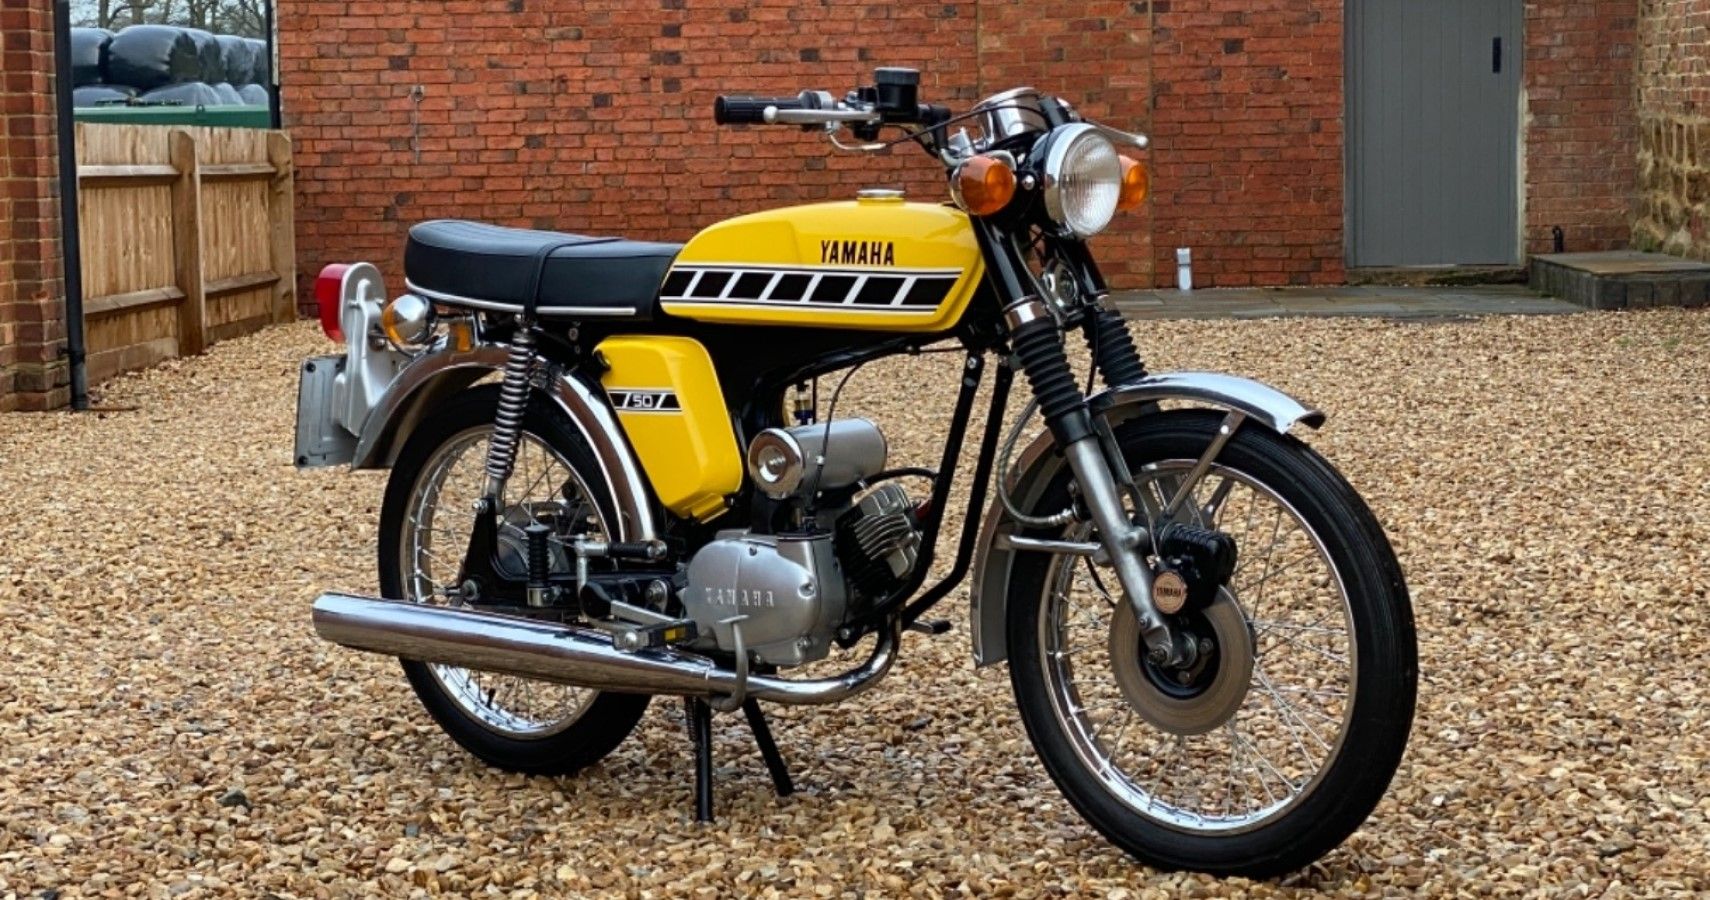 Yamaha FS1-E in yellow front third quarter view